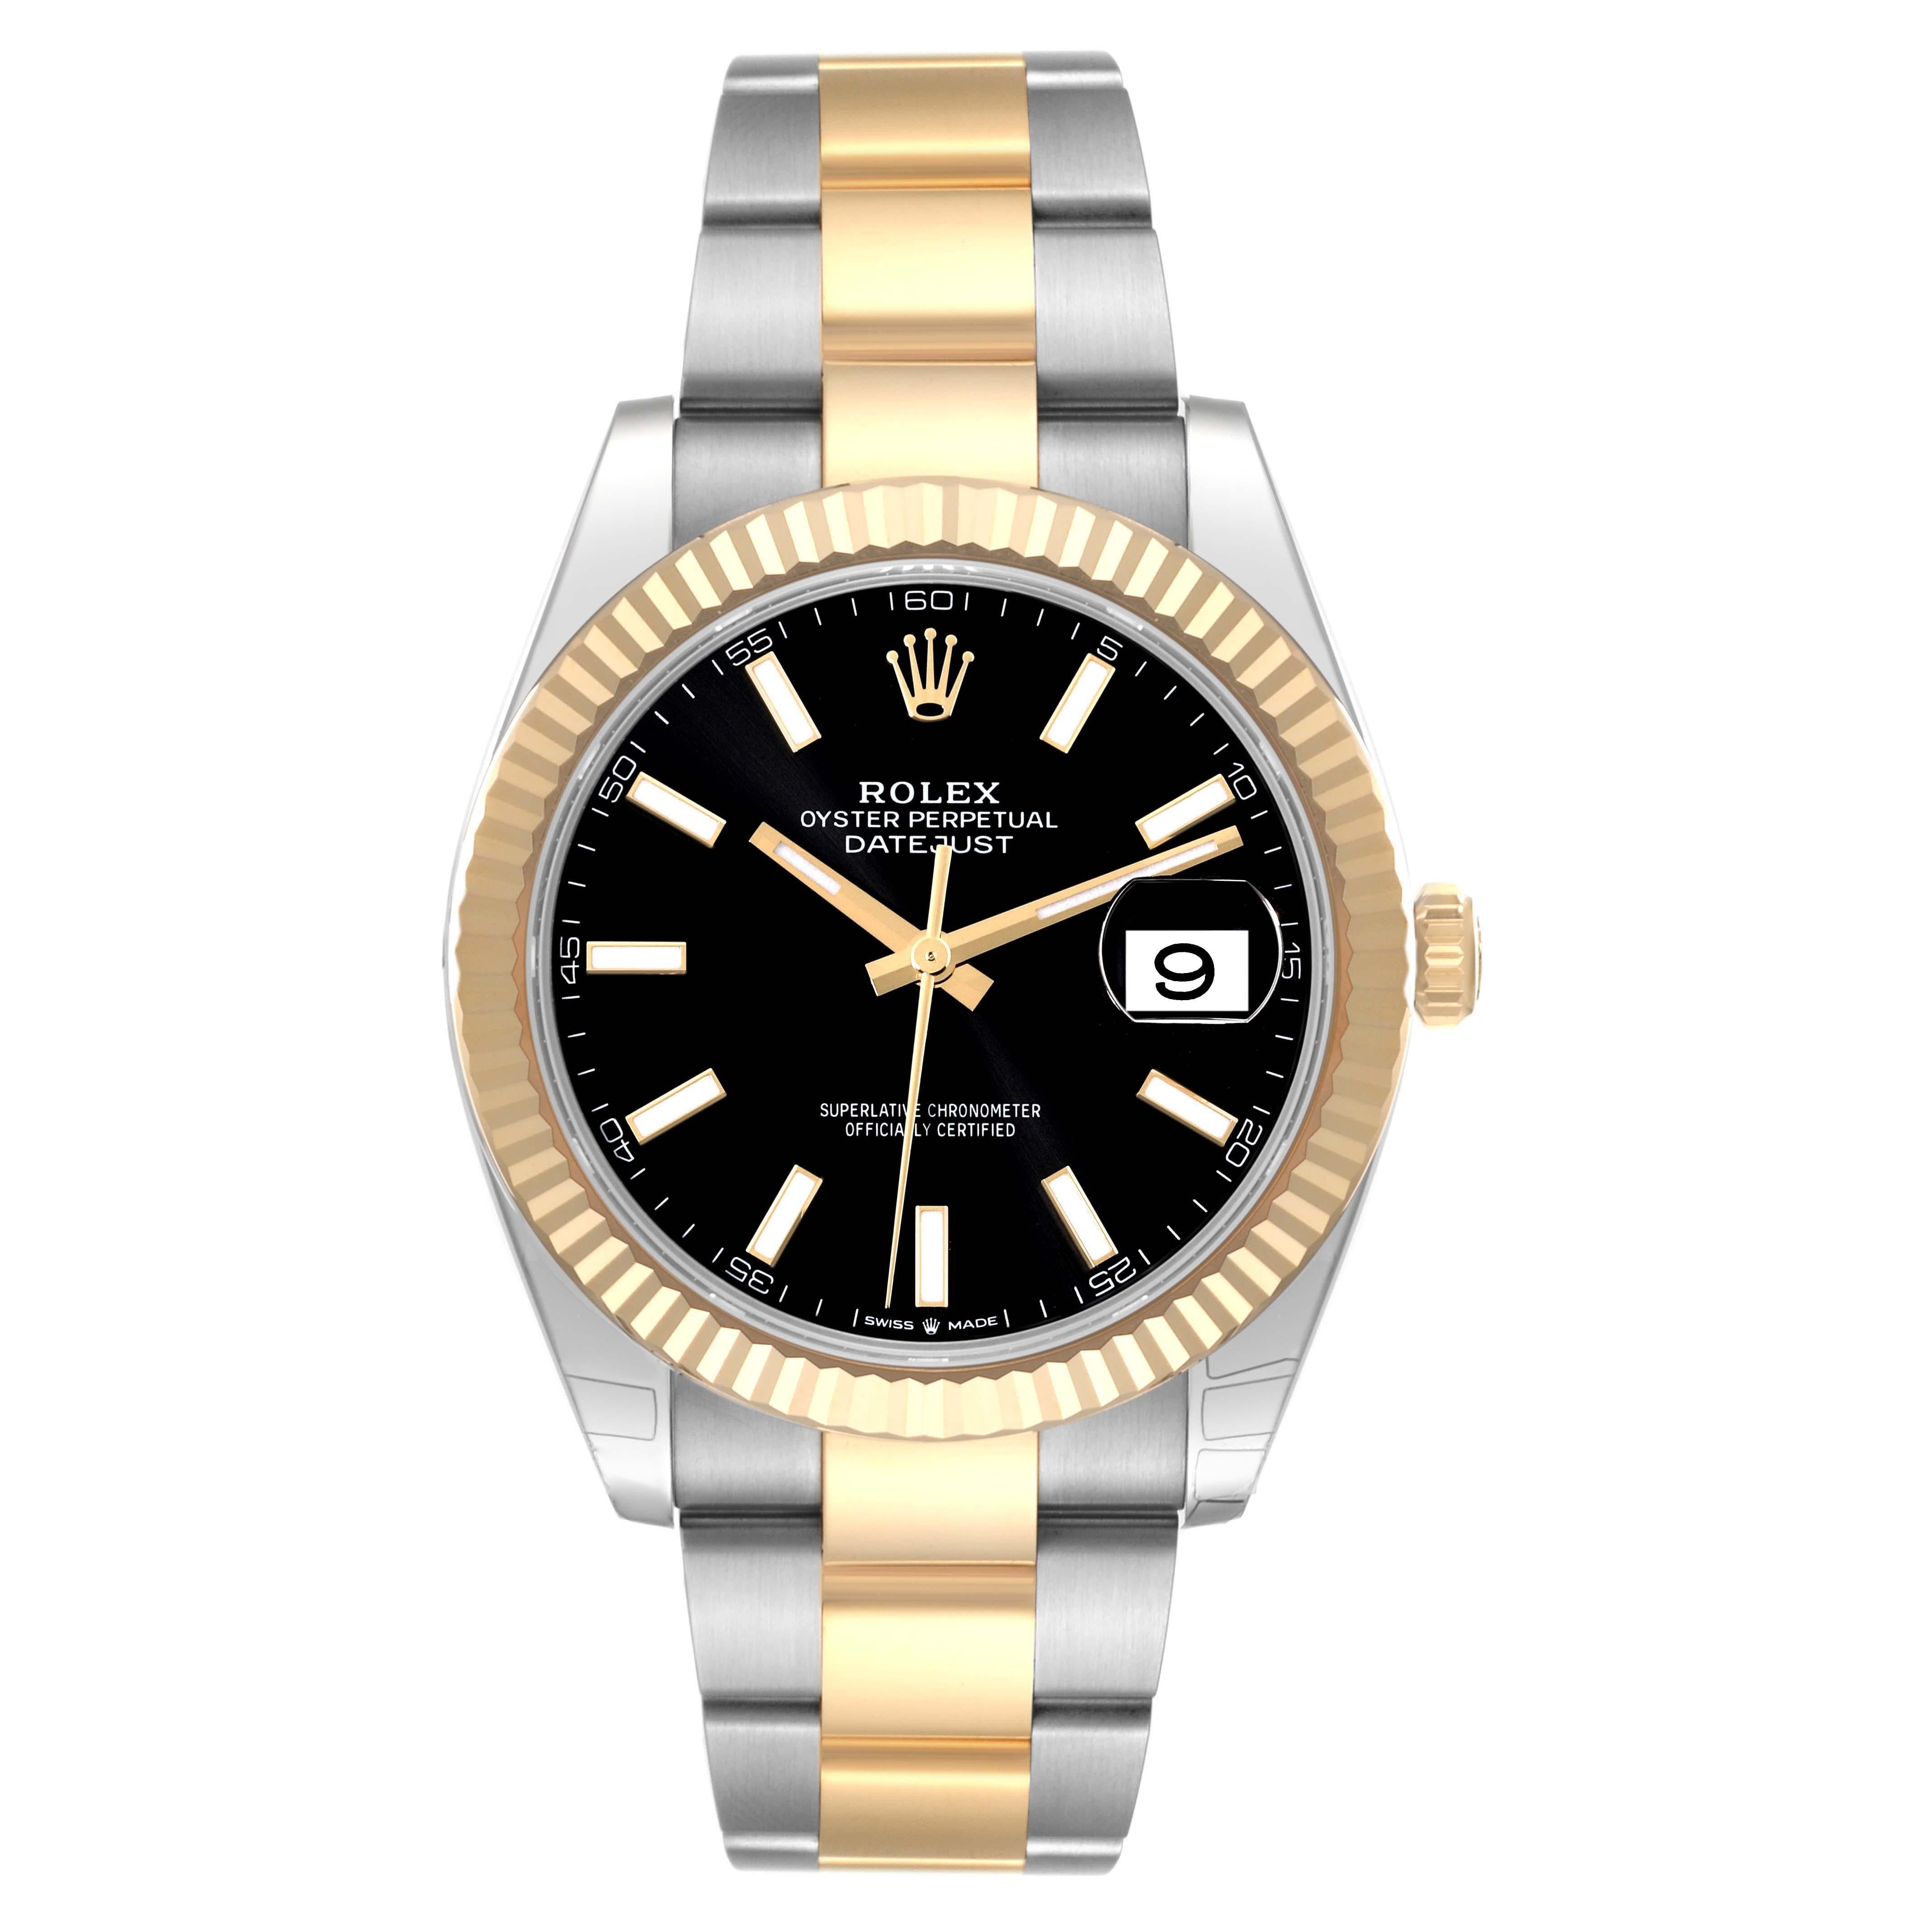 Rolex Datejust 41 Steel Yellow Gold Black Dial Mens Watch 126333 Box Card. Officially certified chronometer self-winding movement. Stainless steel and 18K yellow gold case 41.0 mm in diameter. Rolex logo on the crown. 18K yellow gold fluted bezel.